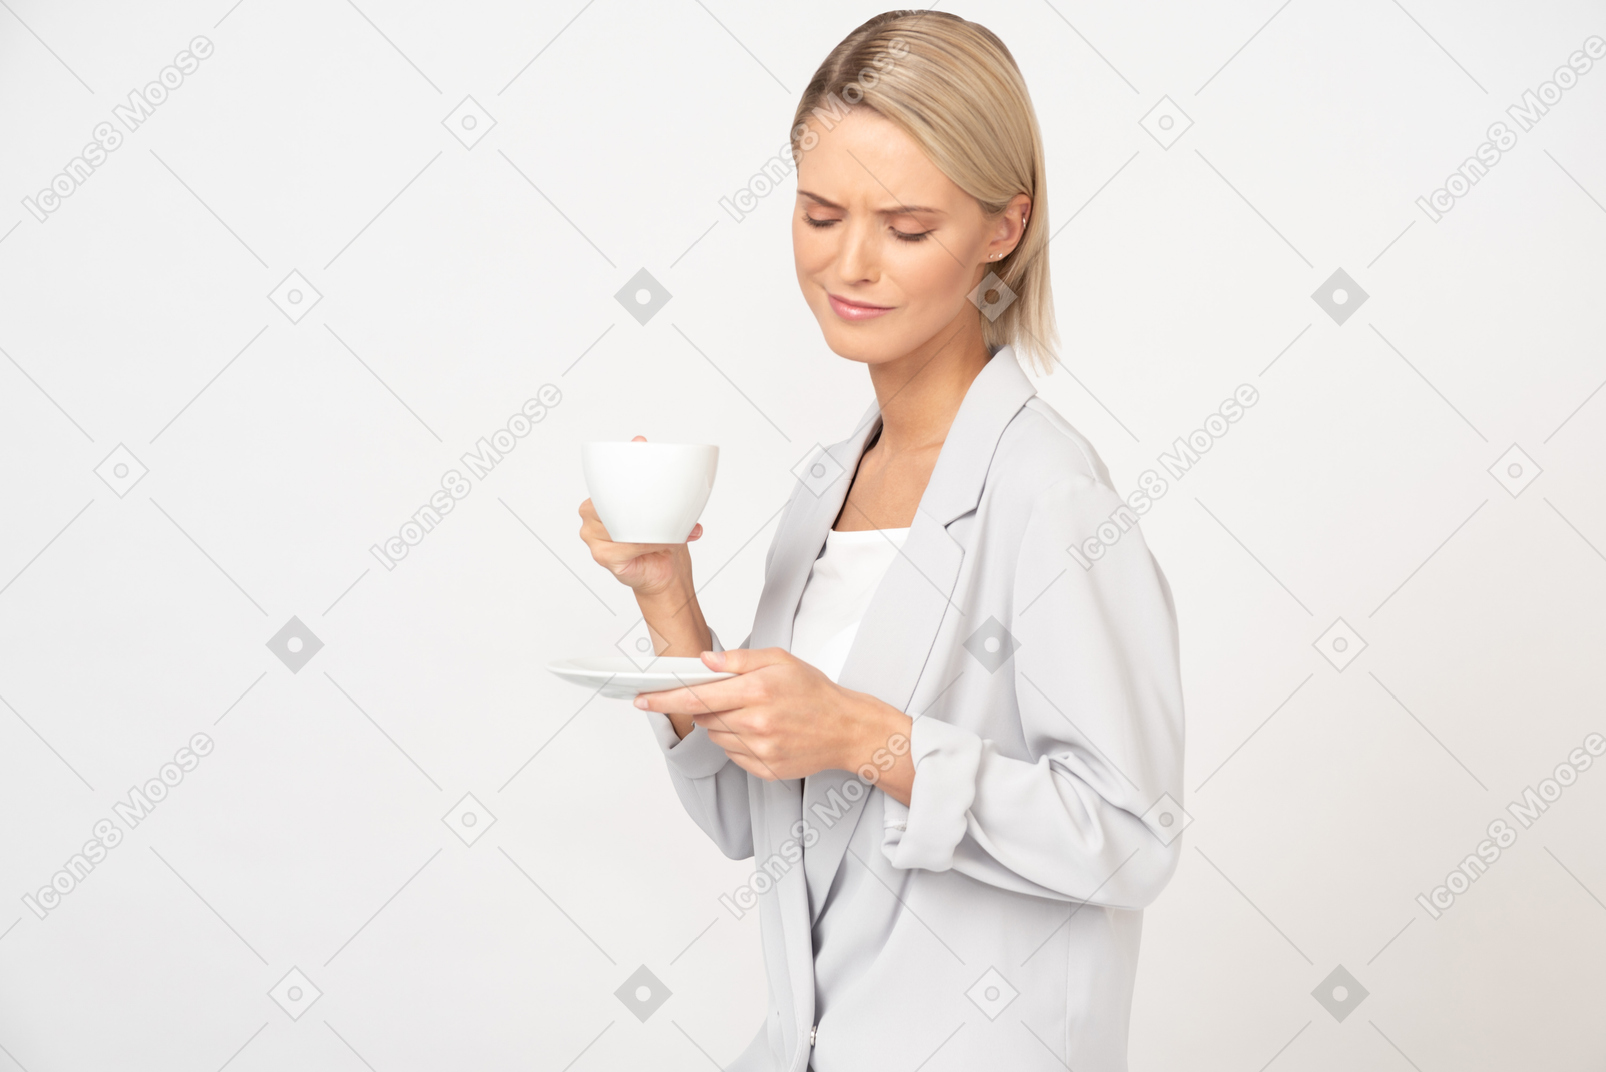 Disappointed with her coffee